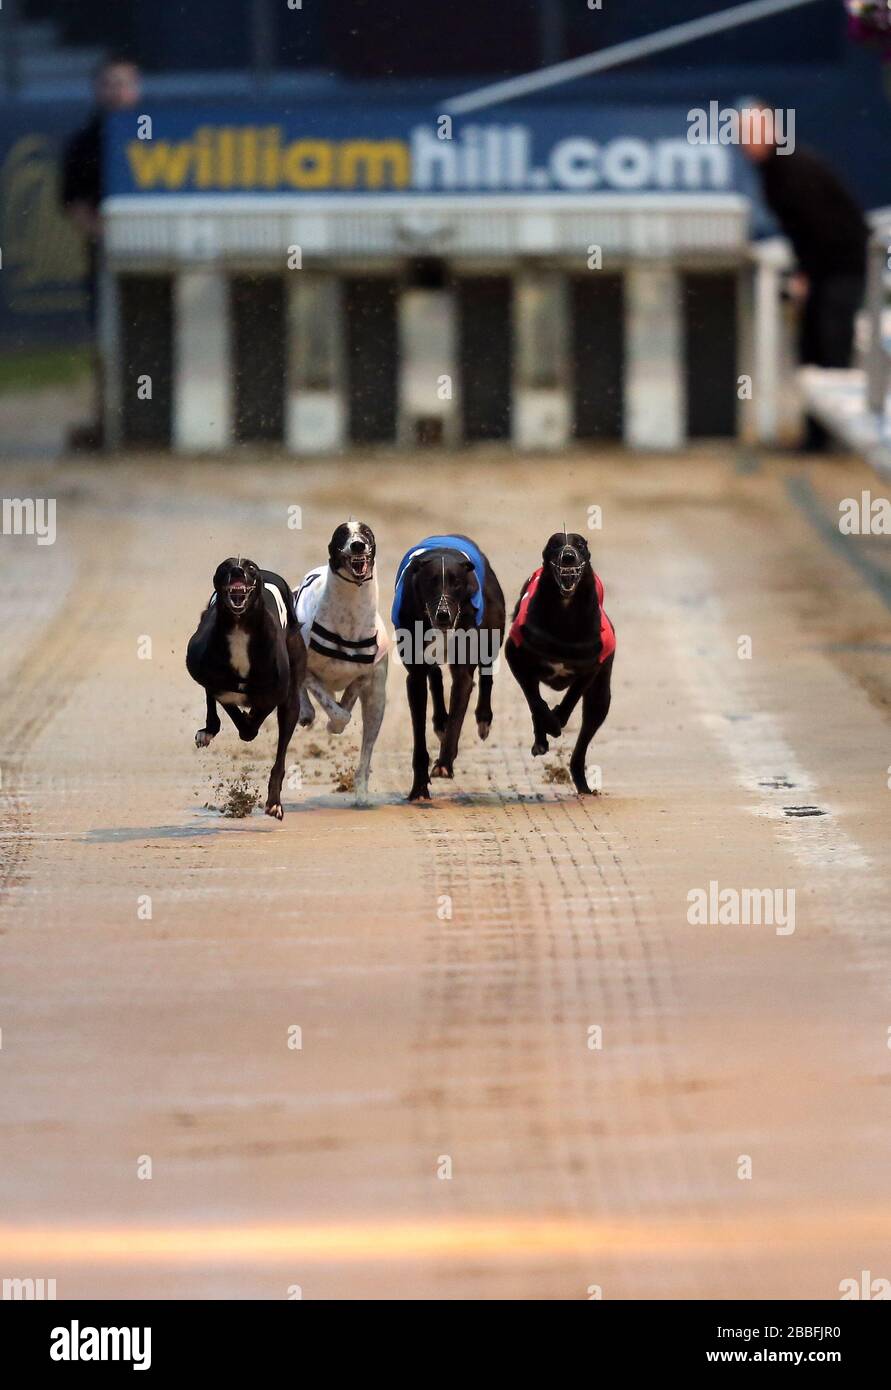 Holborn Junior (no.4 black), Fire Height Spec (no.3 white), Knockglass Billy (no.2 blue) and Money Talks (no.1 red) in action during the William Hill Greyhound Derby 2nd Round Heat 13 Stock Photo